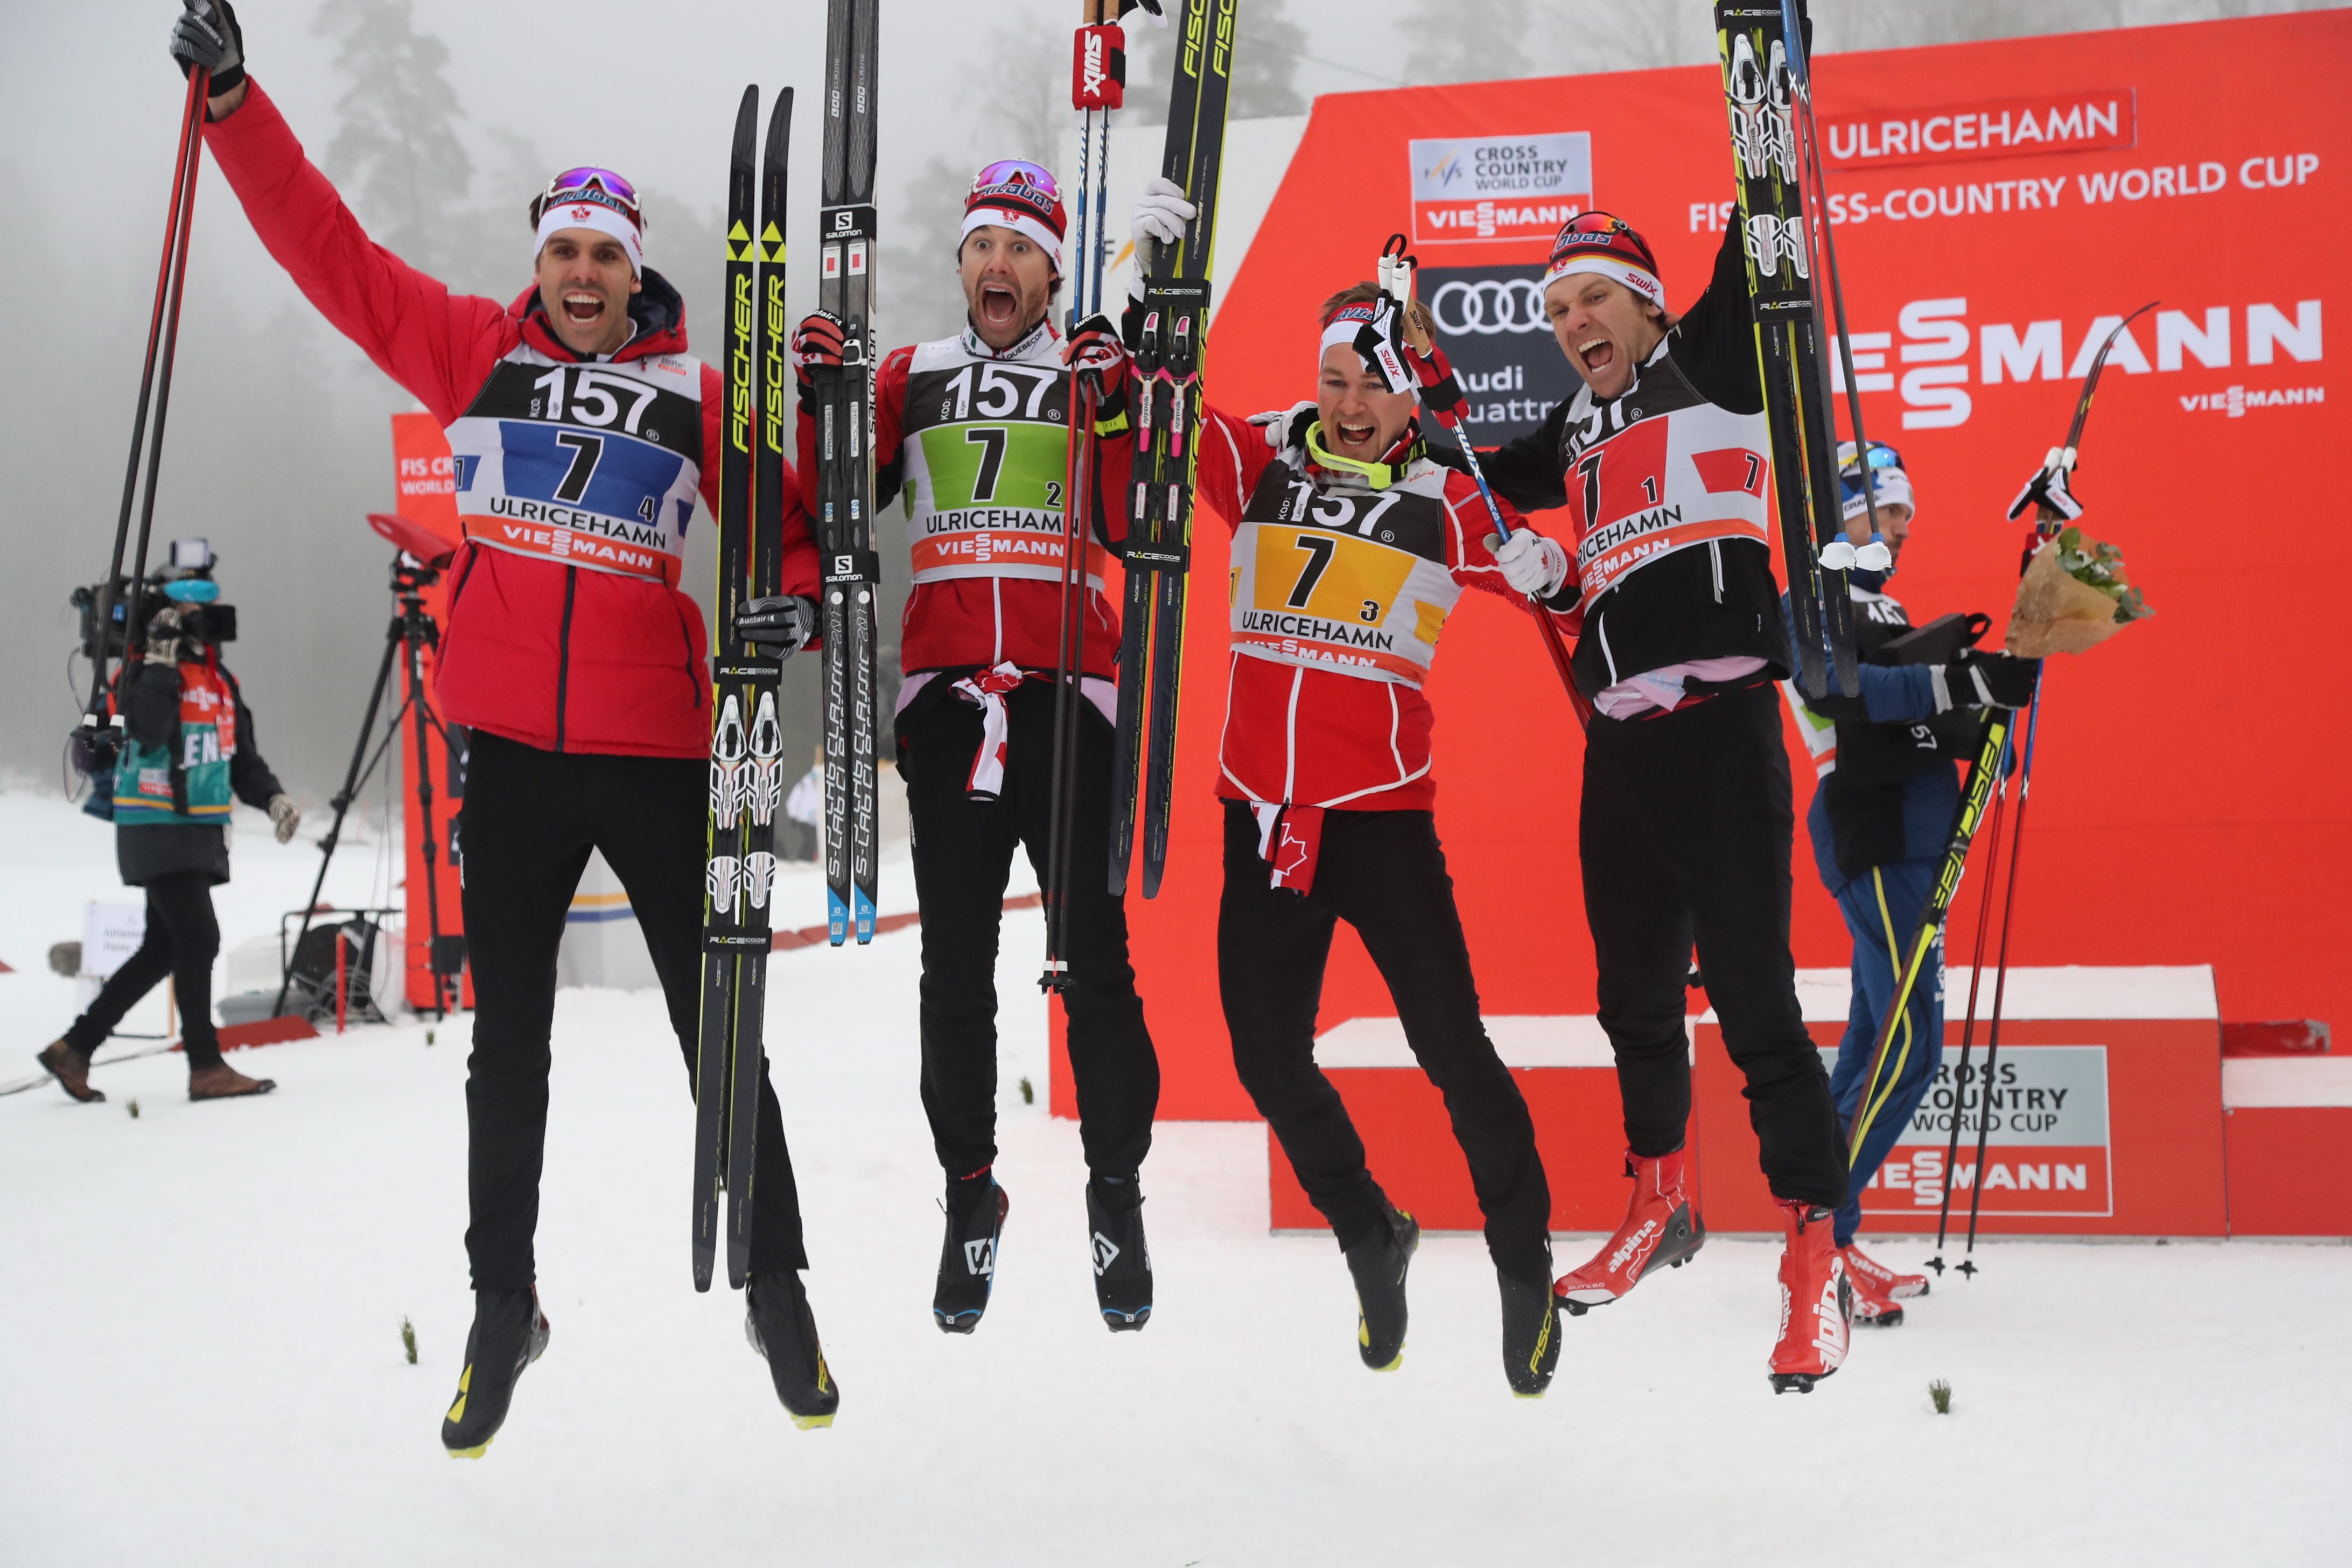 Team of Canada, from left, Len Valjas, Alex Harvey, Knute Johnsgaard and Devon Kershaw celebrate their third place in men's relay 4x7.5 km competition at the FIS Cross Country skiing World Cup event in Ulricehamn, Sweden, Sunday Jan. 22, 2017. (Adam Ihse / TT via AP)